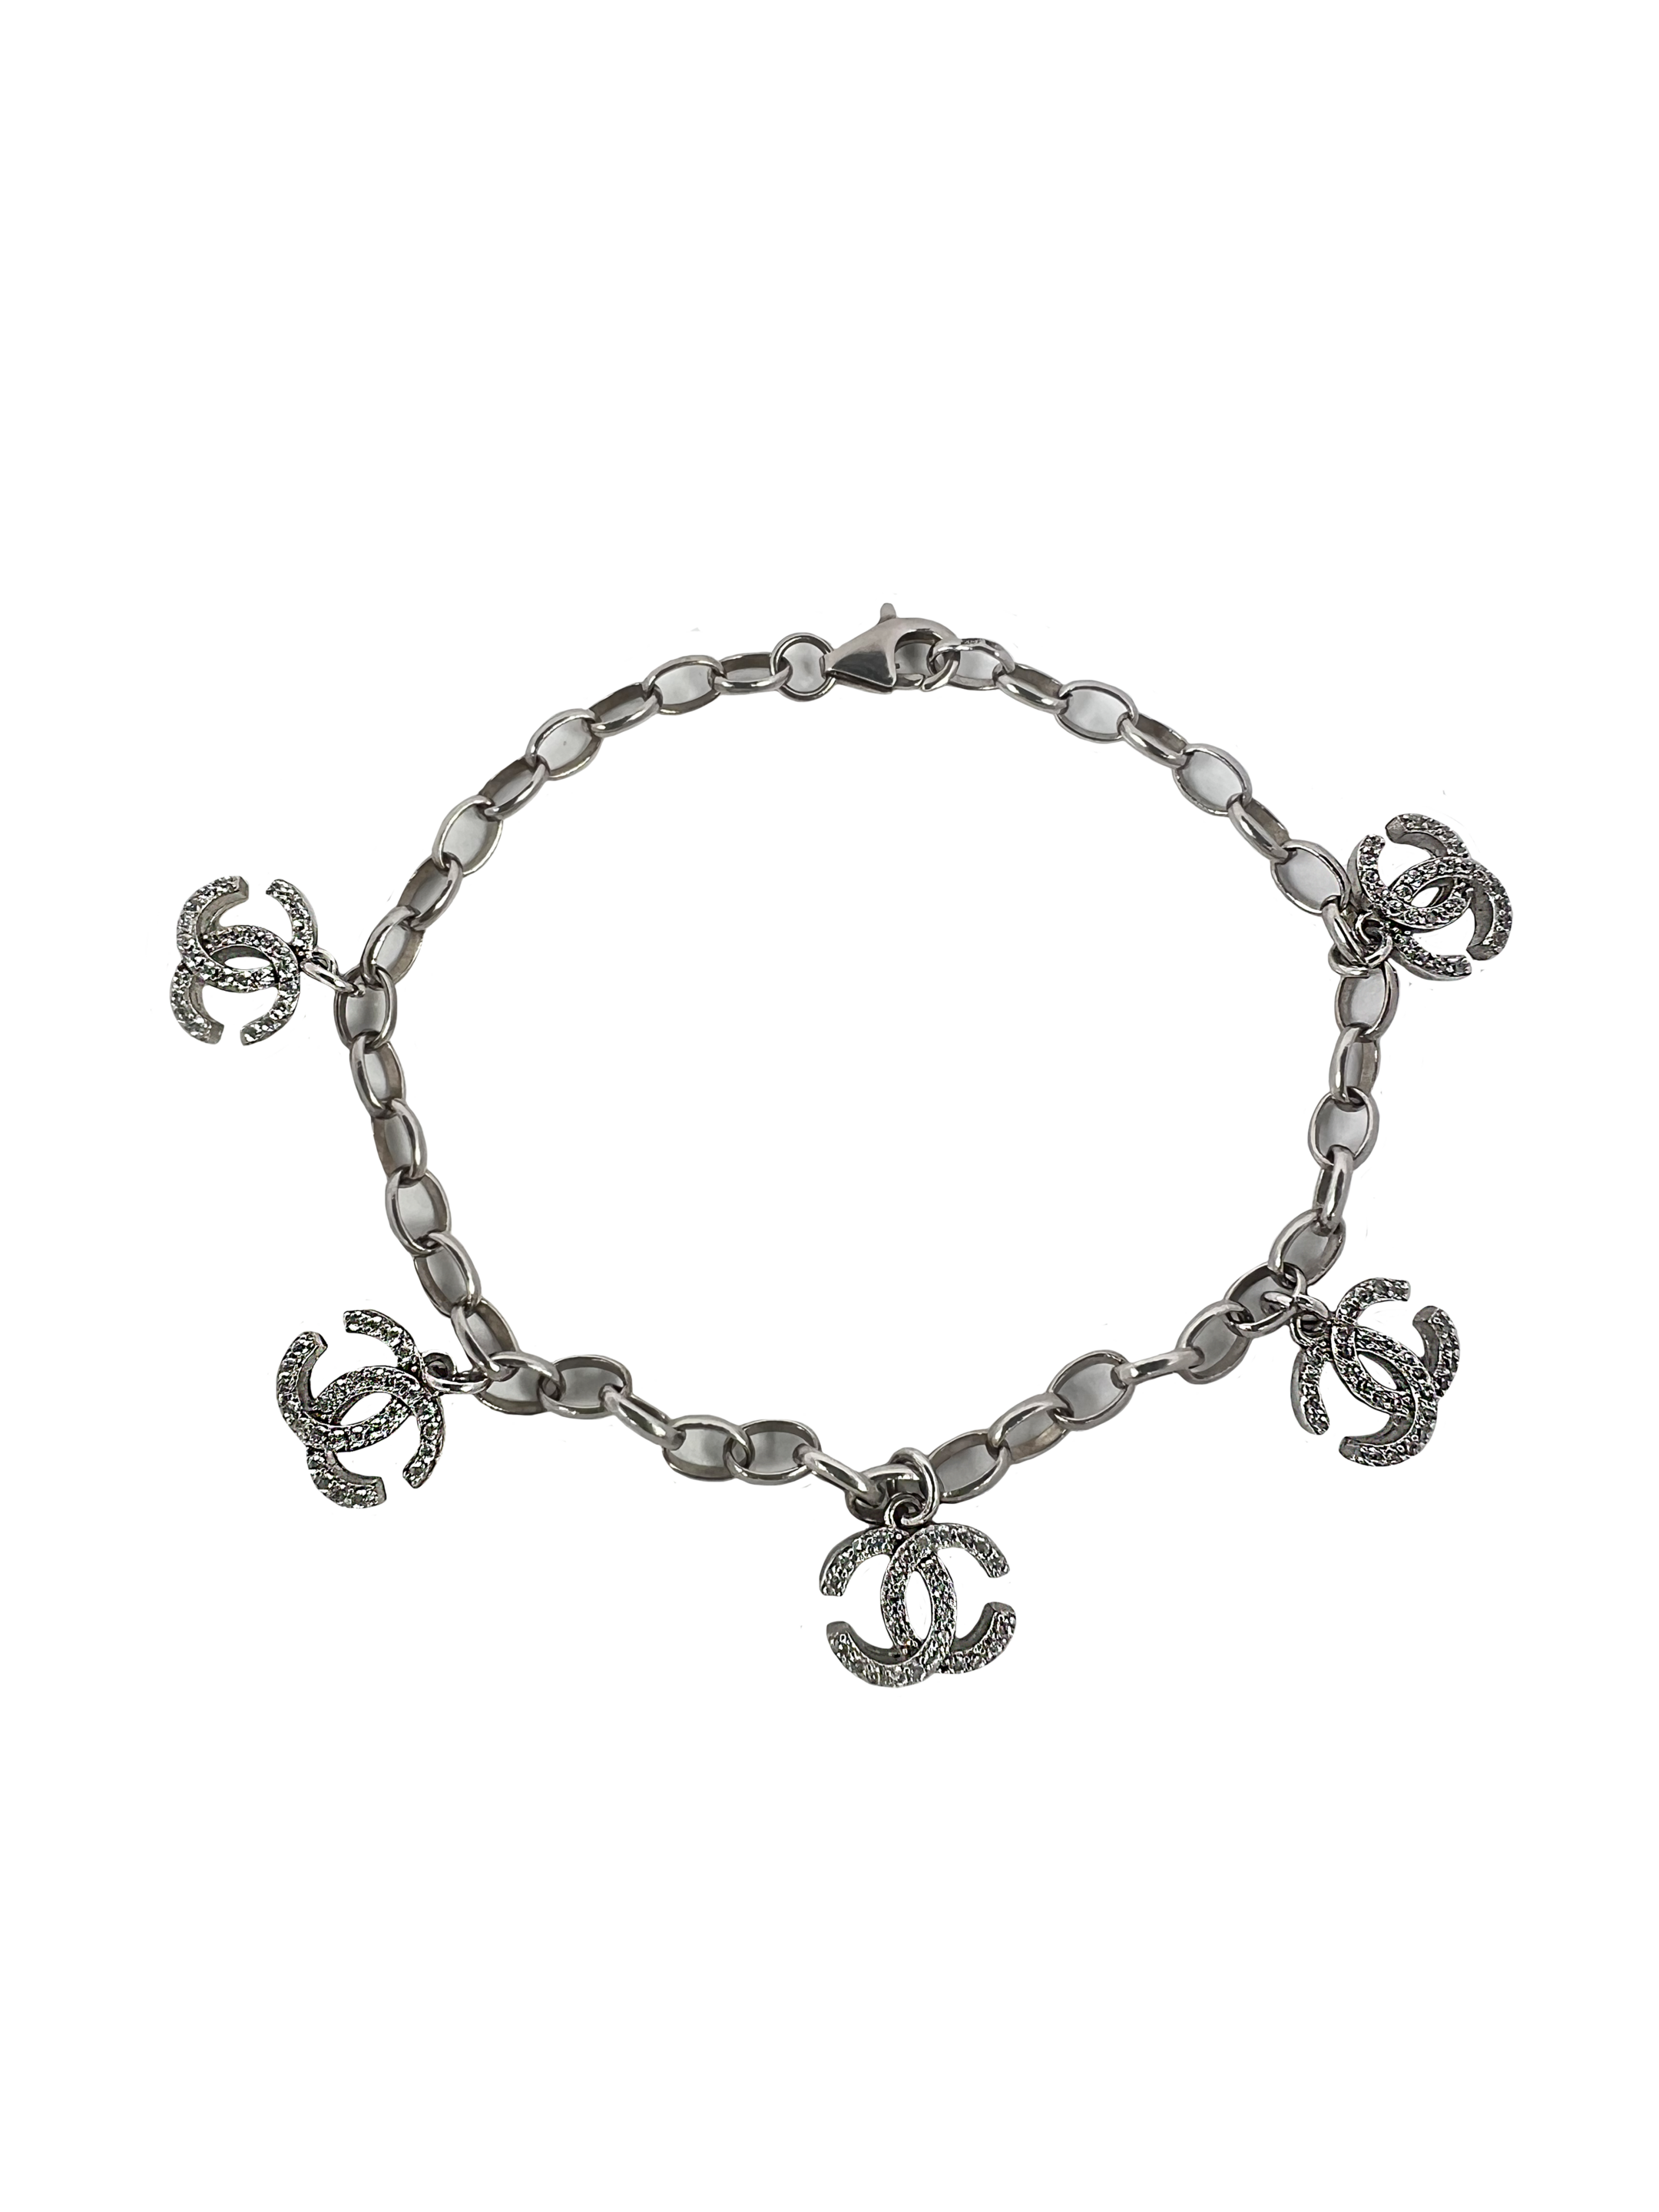 Silver modern bracelet with the letters CC